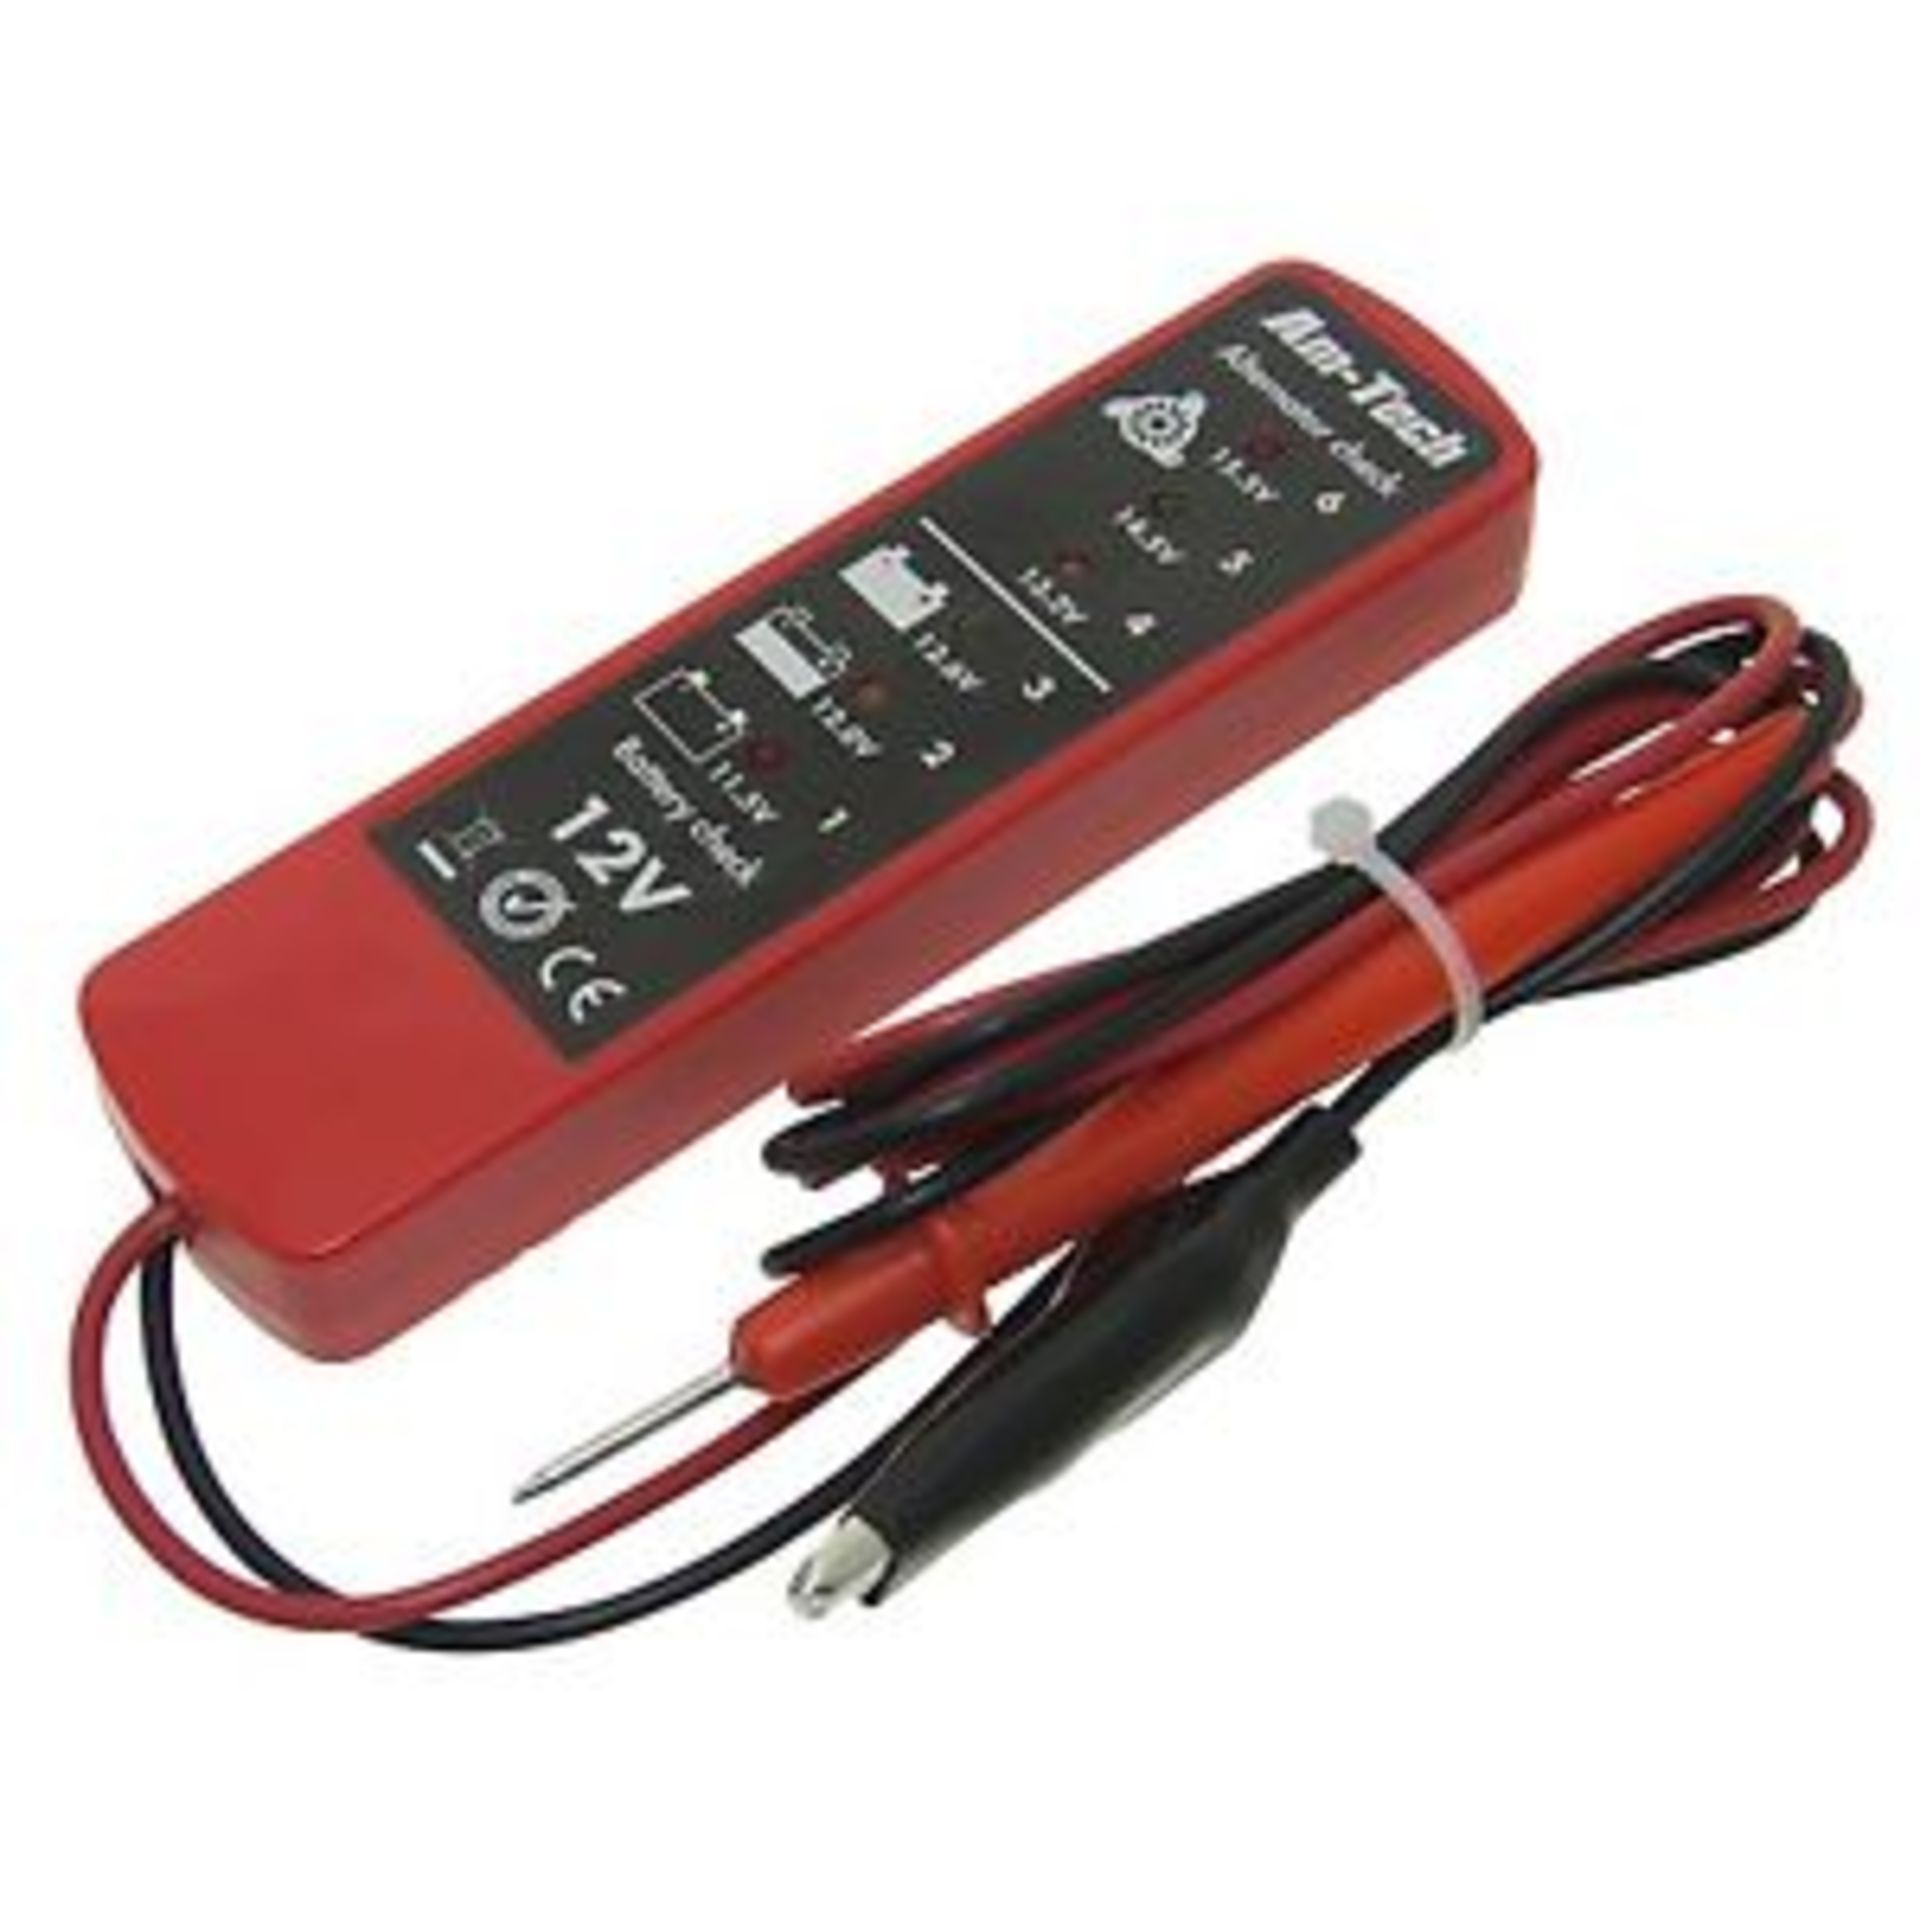 V *TRADE QTY* Brand New Battery & Alternator Tester X 5 YOUR BID PRICE TO BE MULTIPLIED BY FIVE